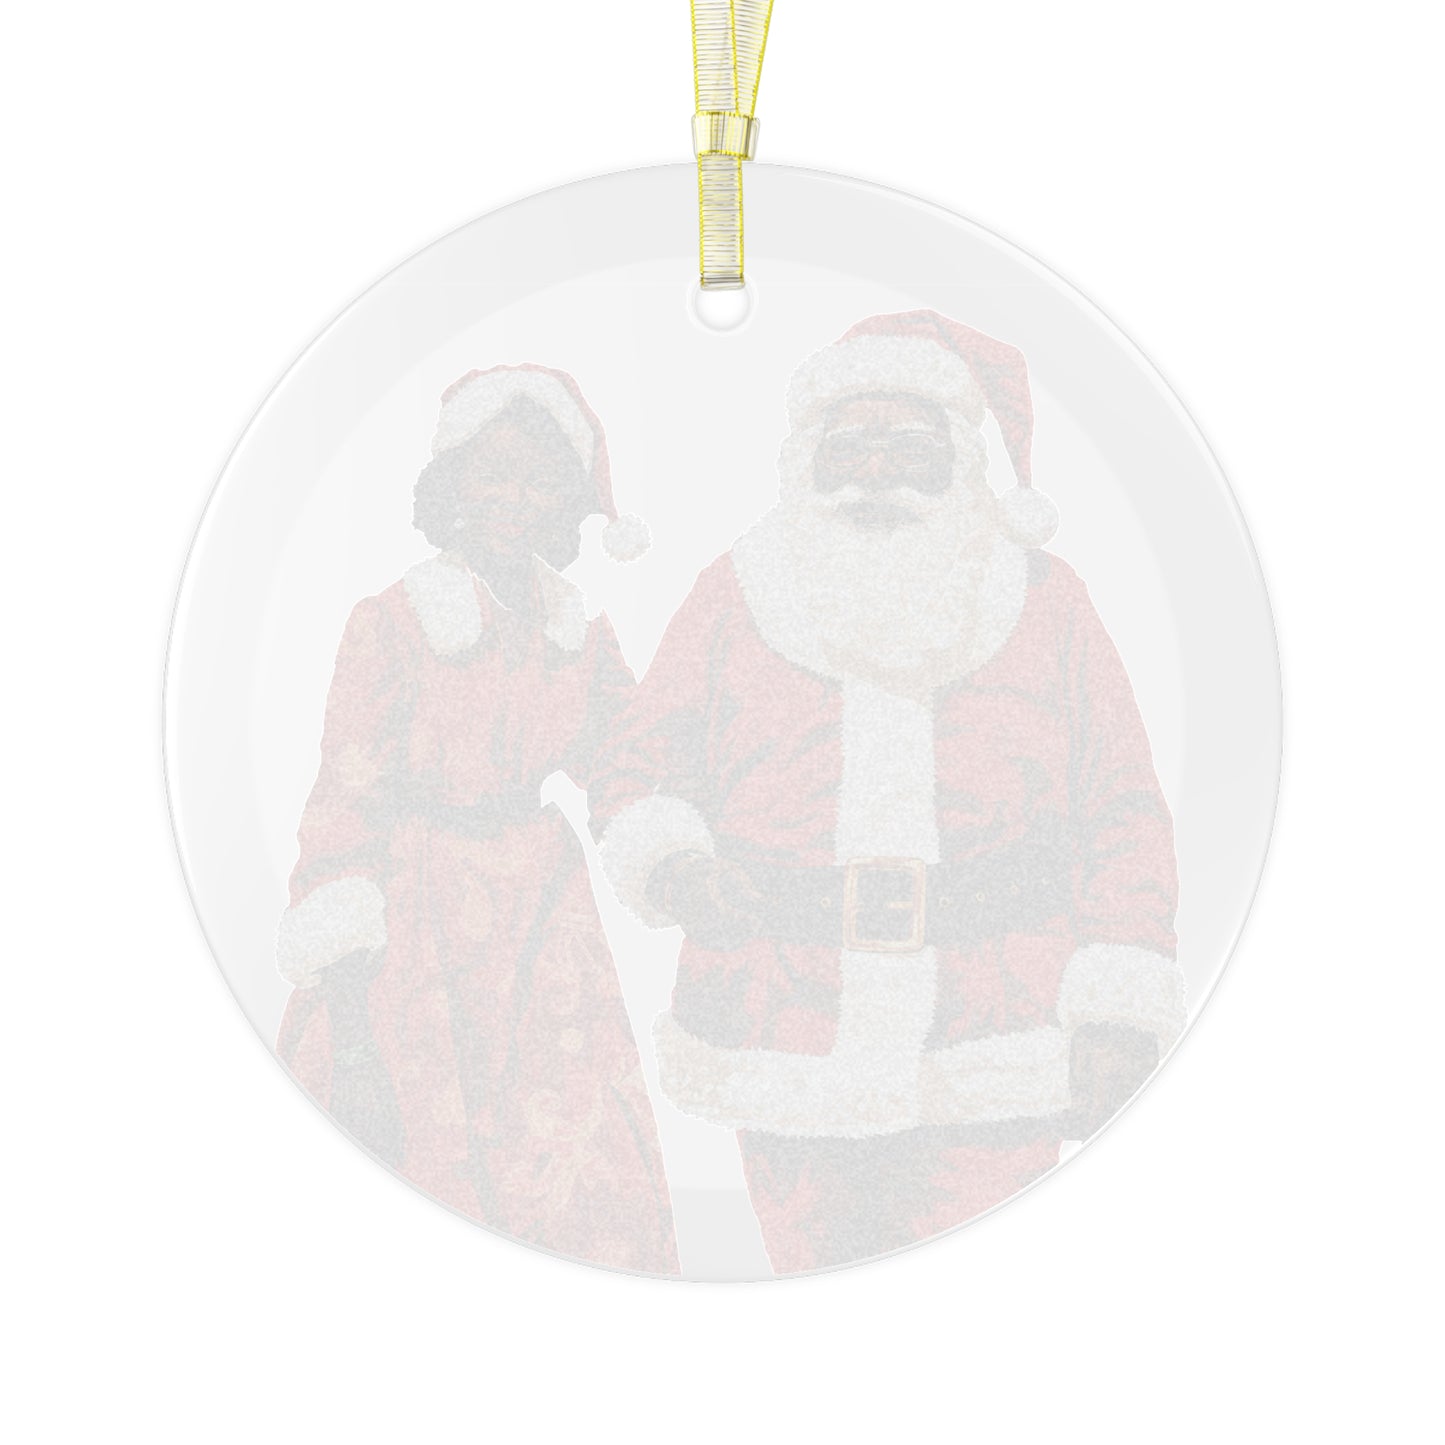 Mr and Mrs Claus Glass Ornament